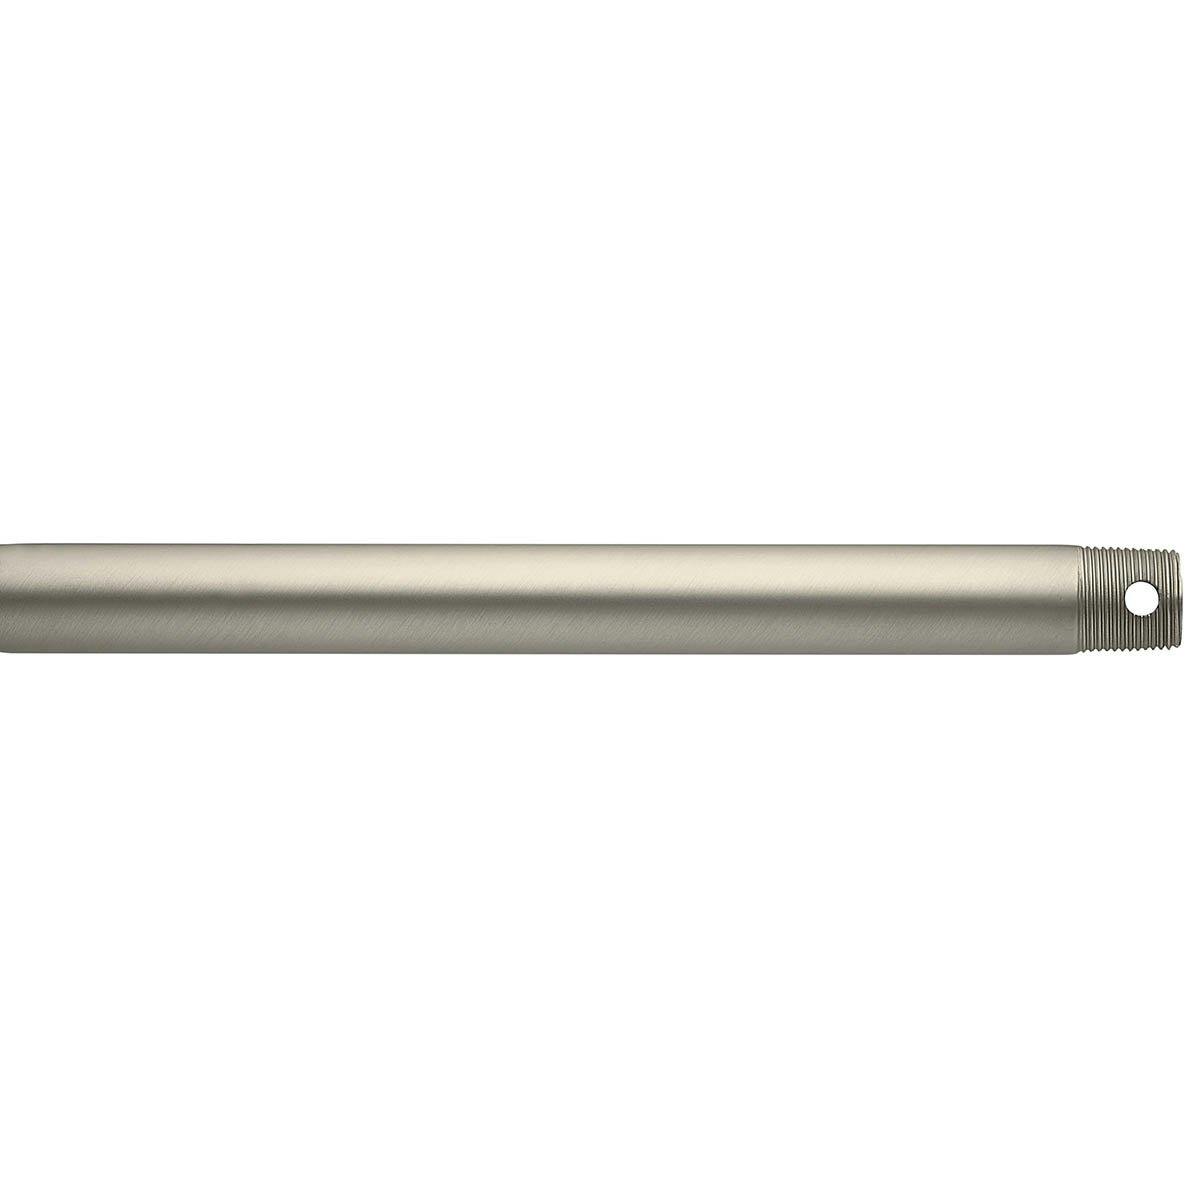 Dual Threaded 72" Downrod Brushed Nickel on a white background